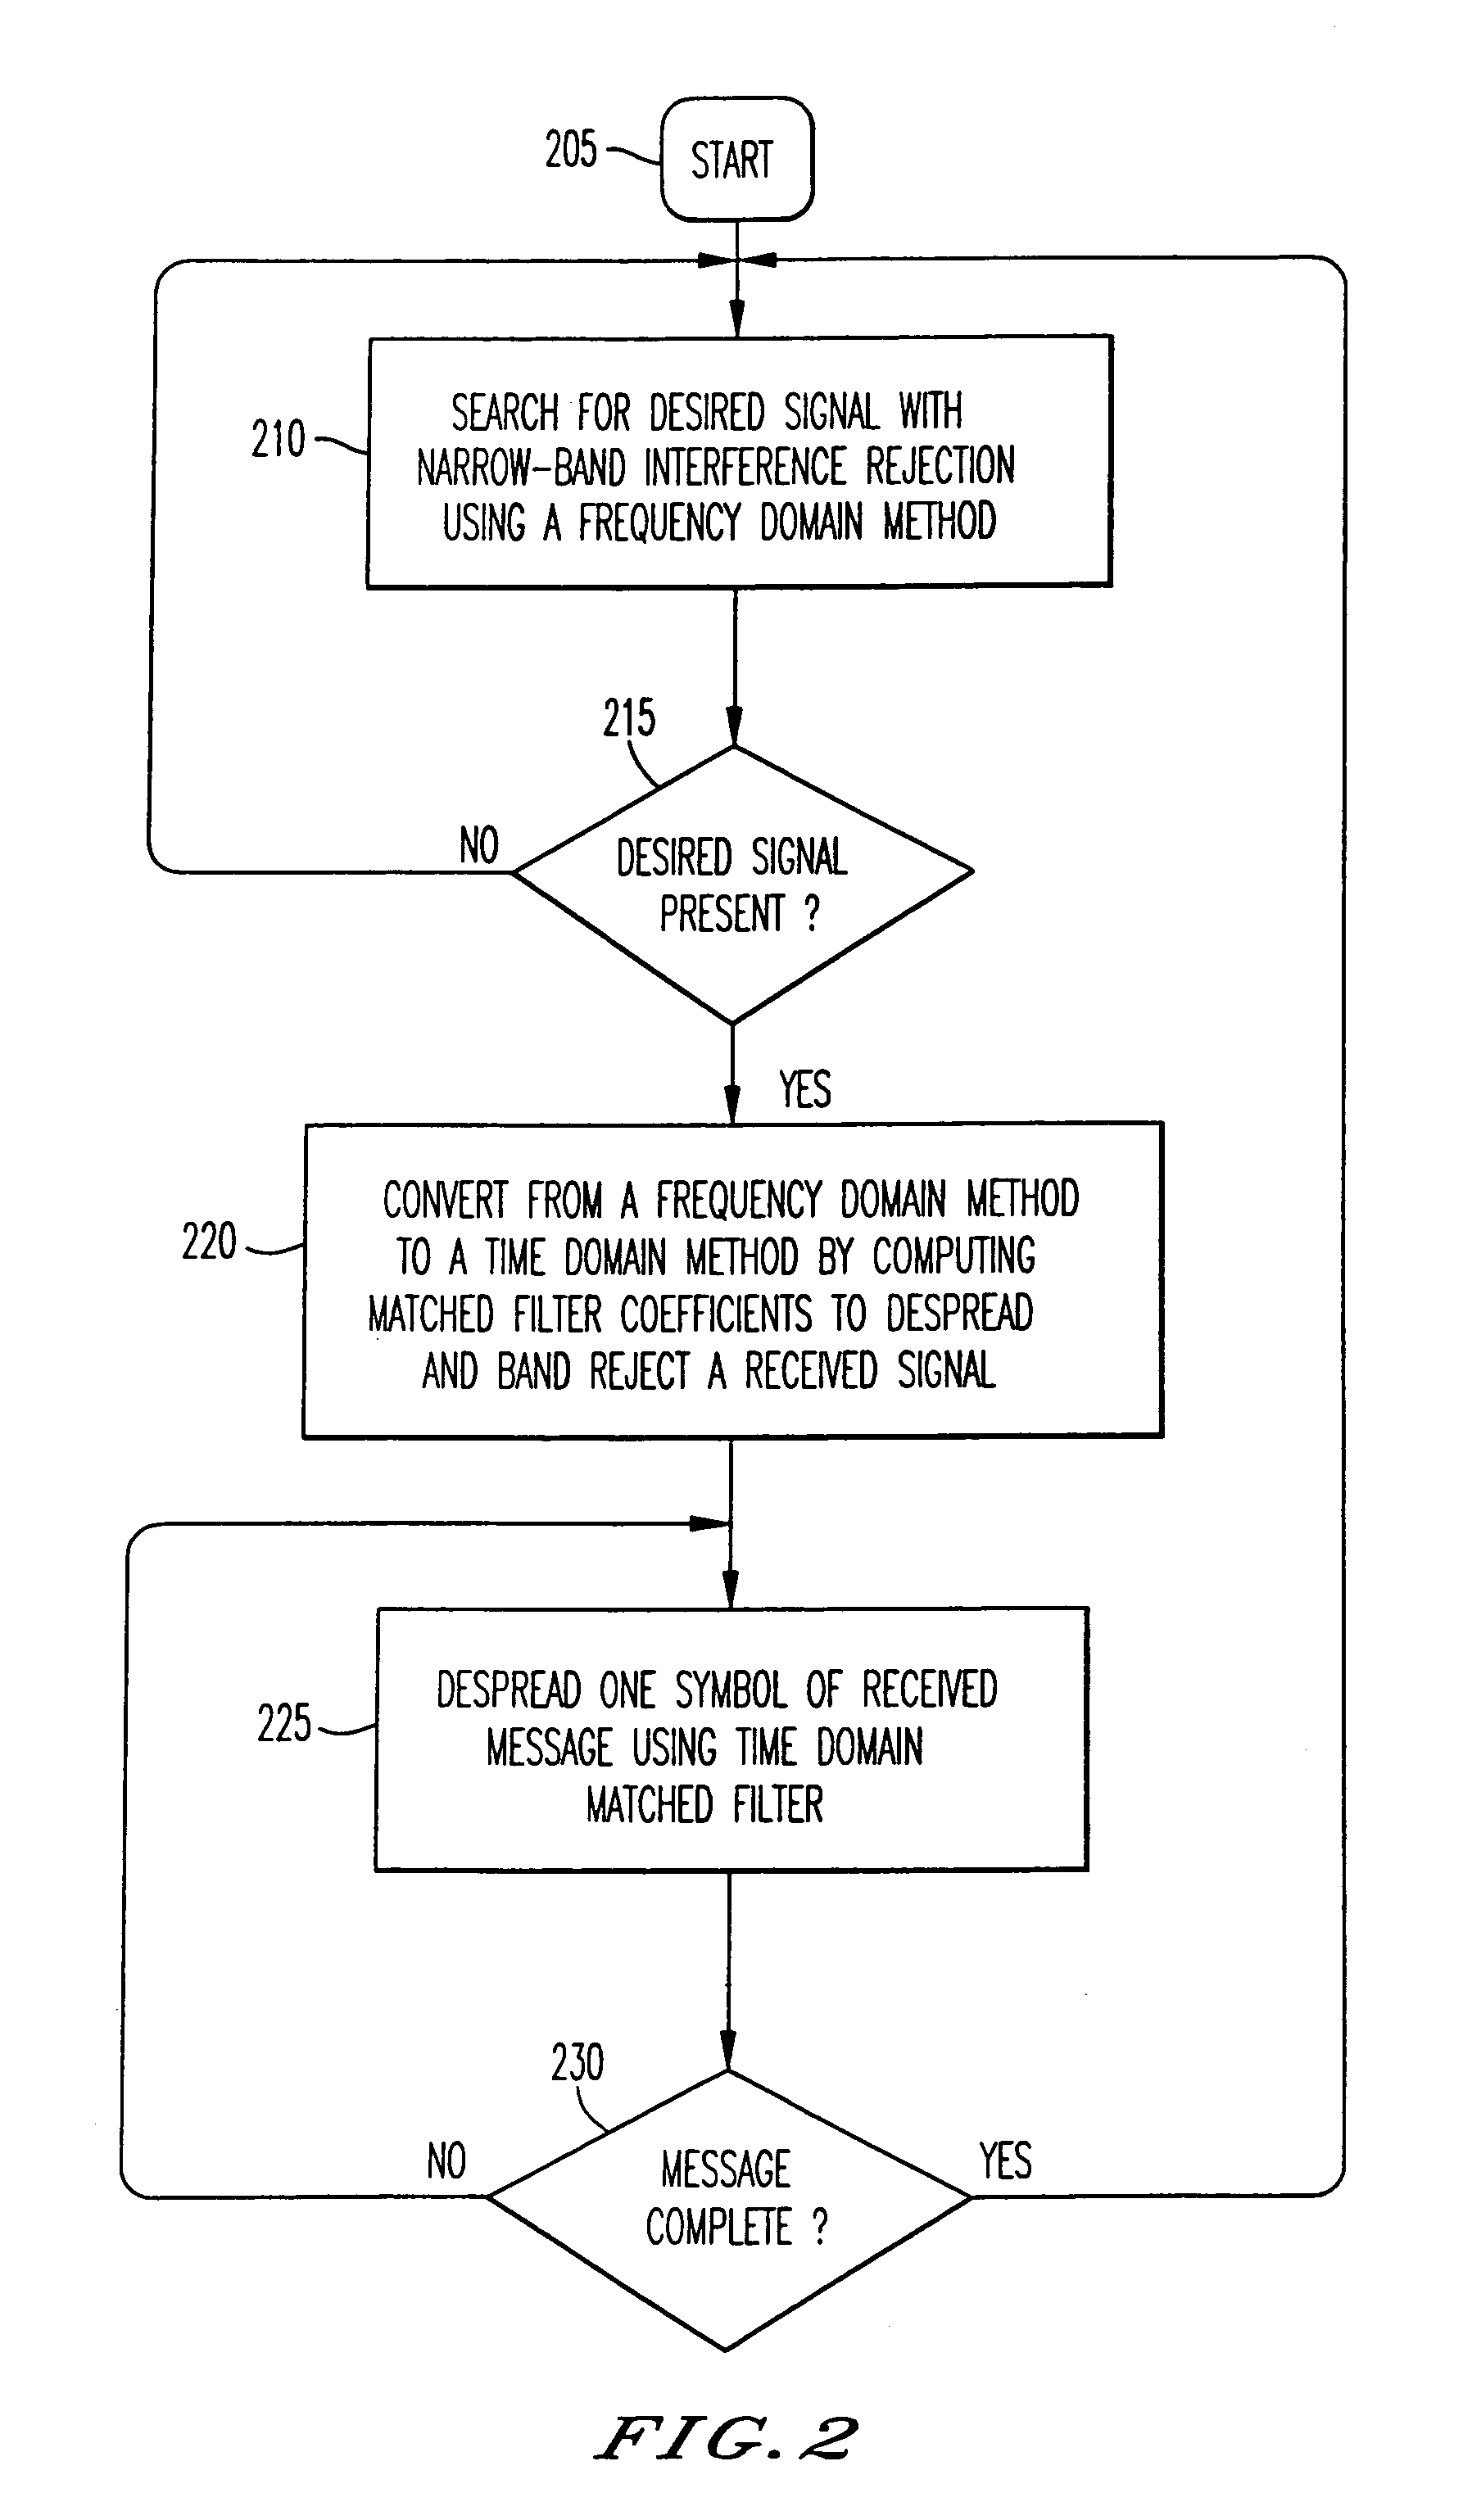 Narrow-band interference rejecting spread spectrum radio system and method